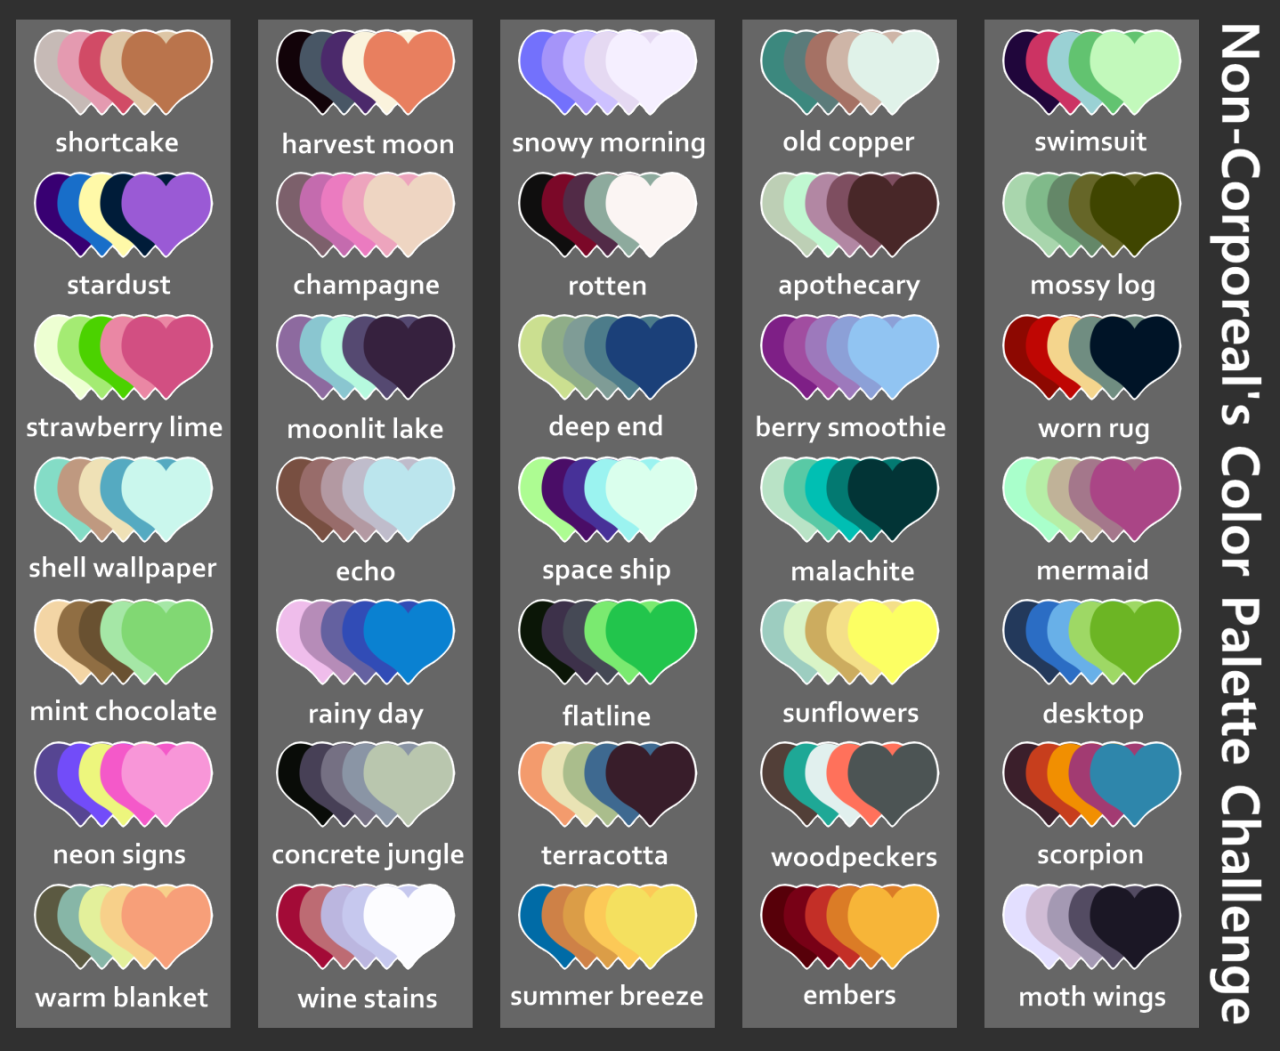 animations' color palettes on Tumblr